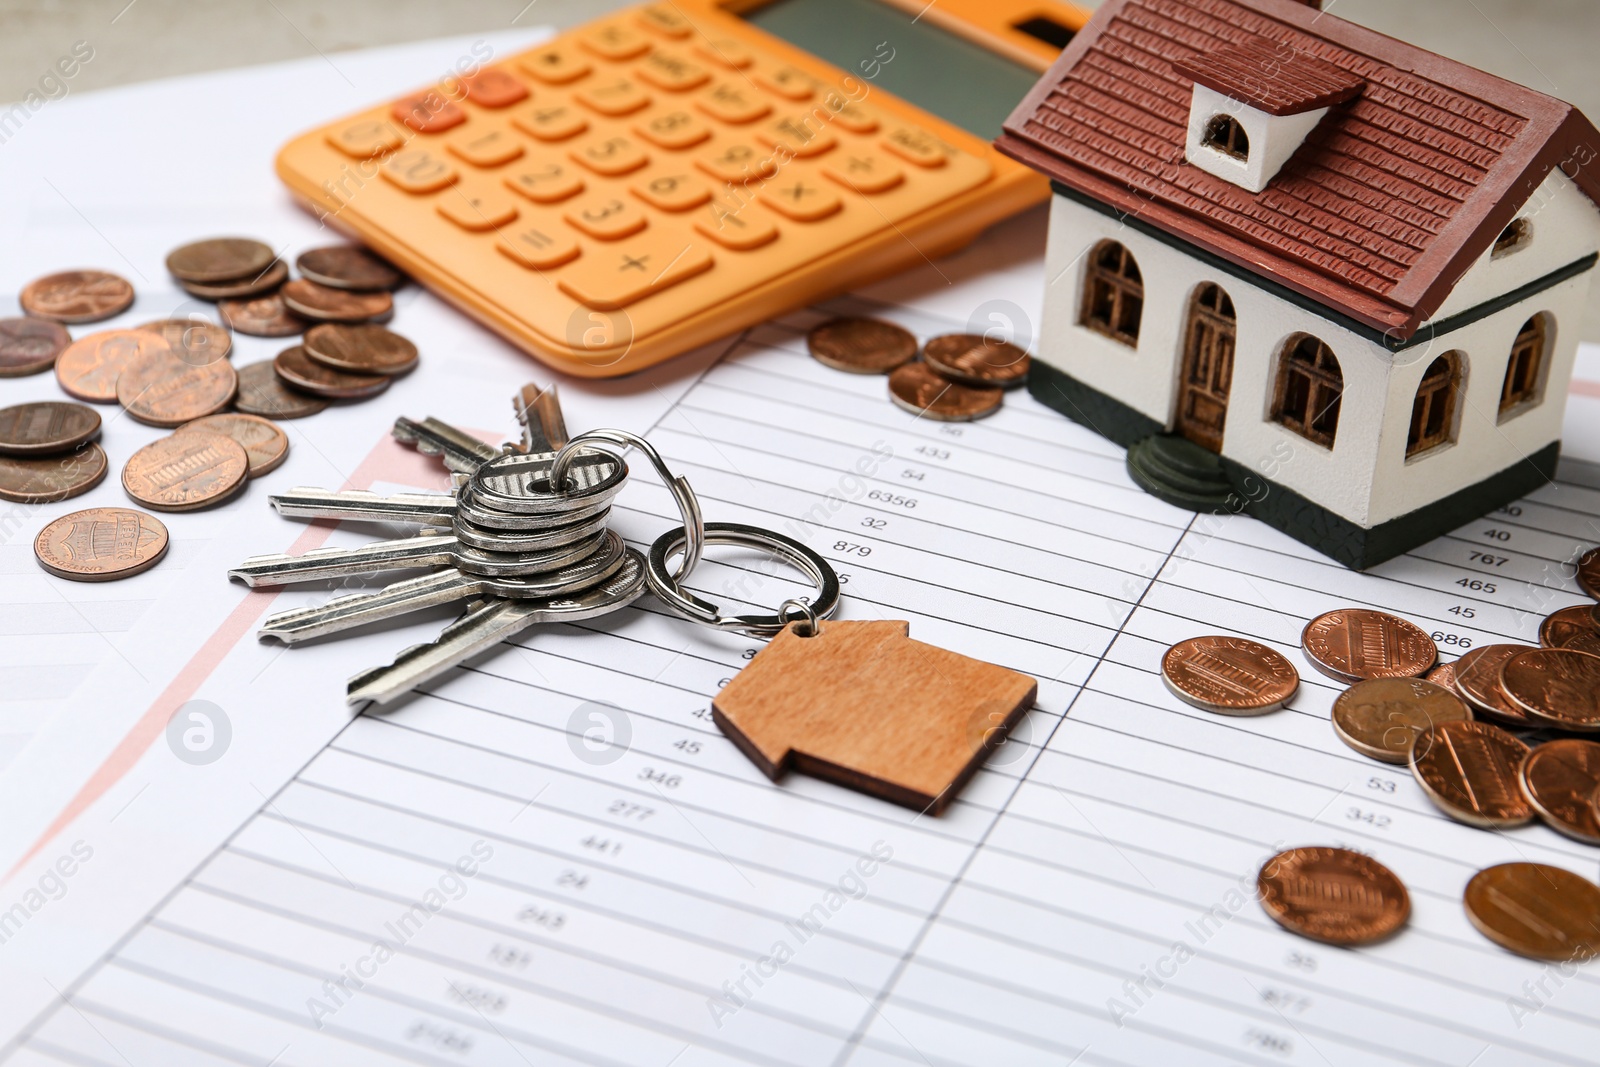 Photo of House model with calculator, keys and coins on documents, closeup. Real estate agent service